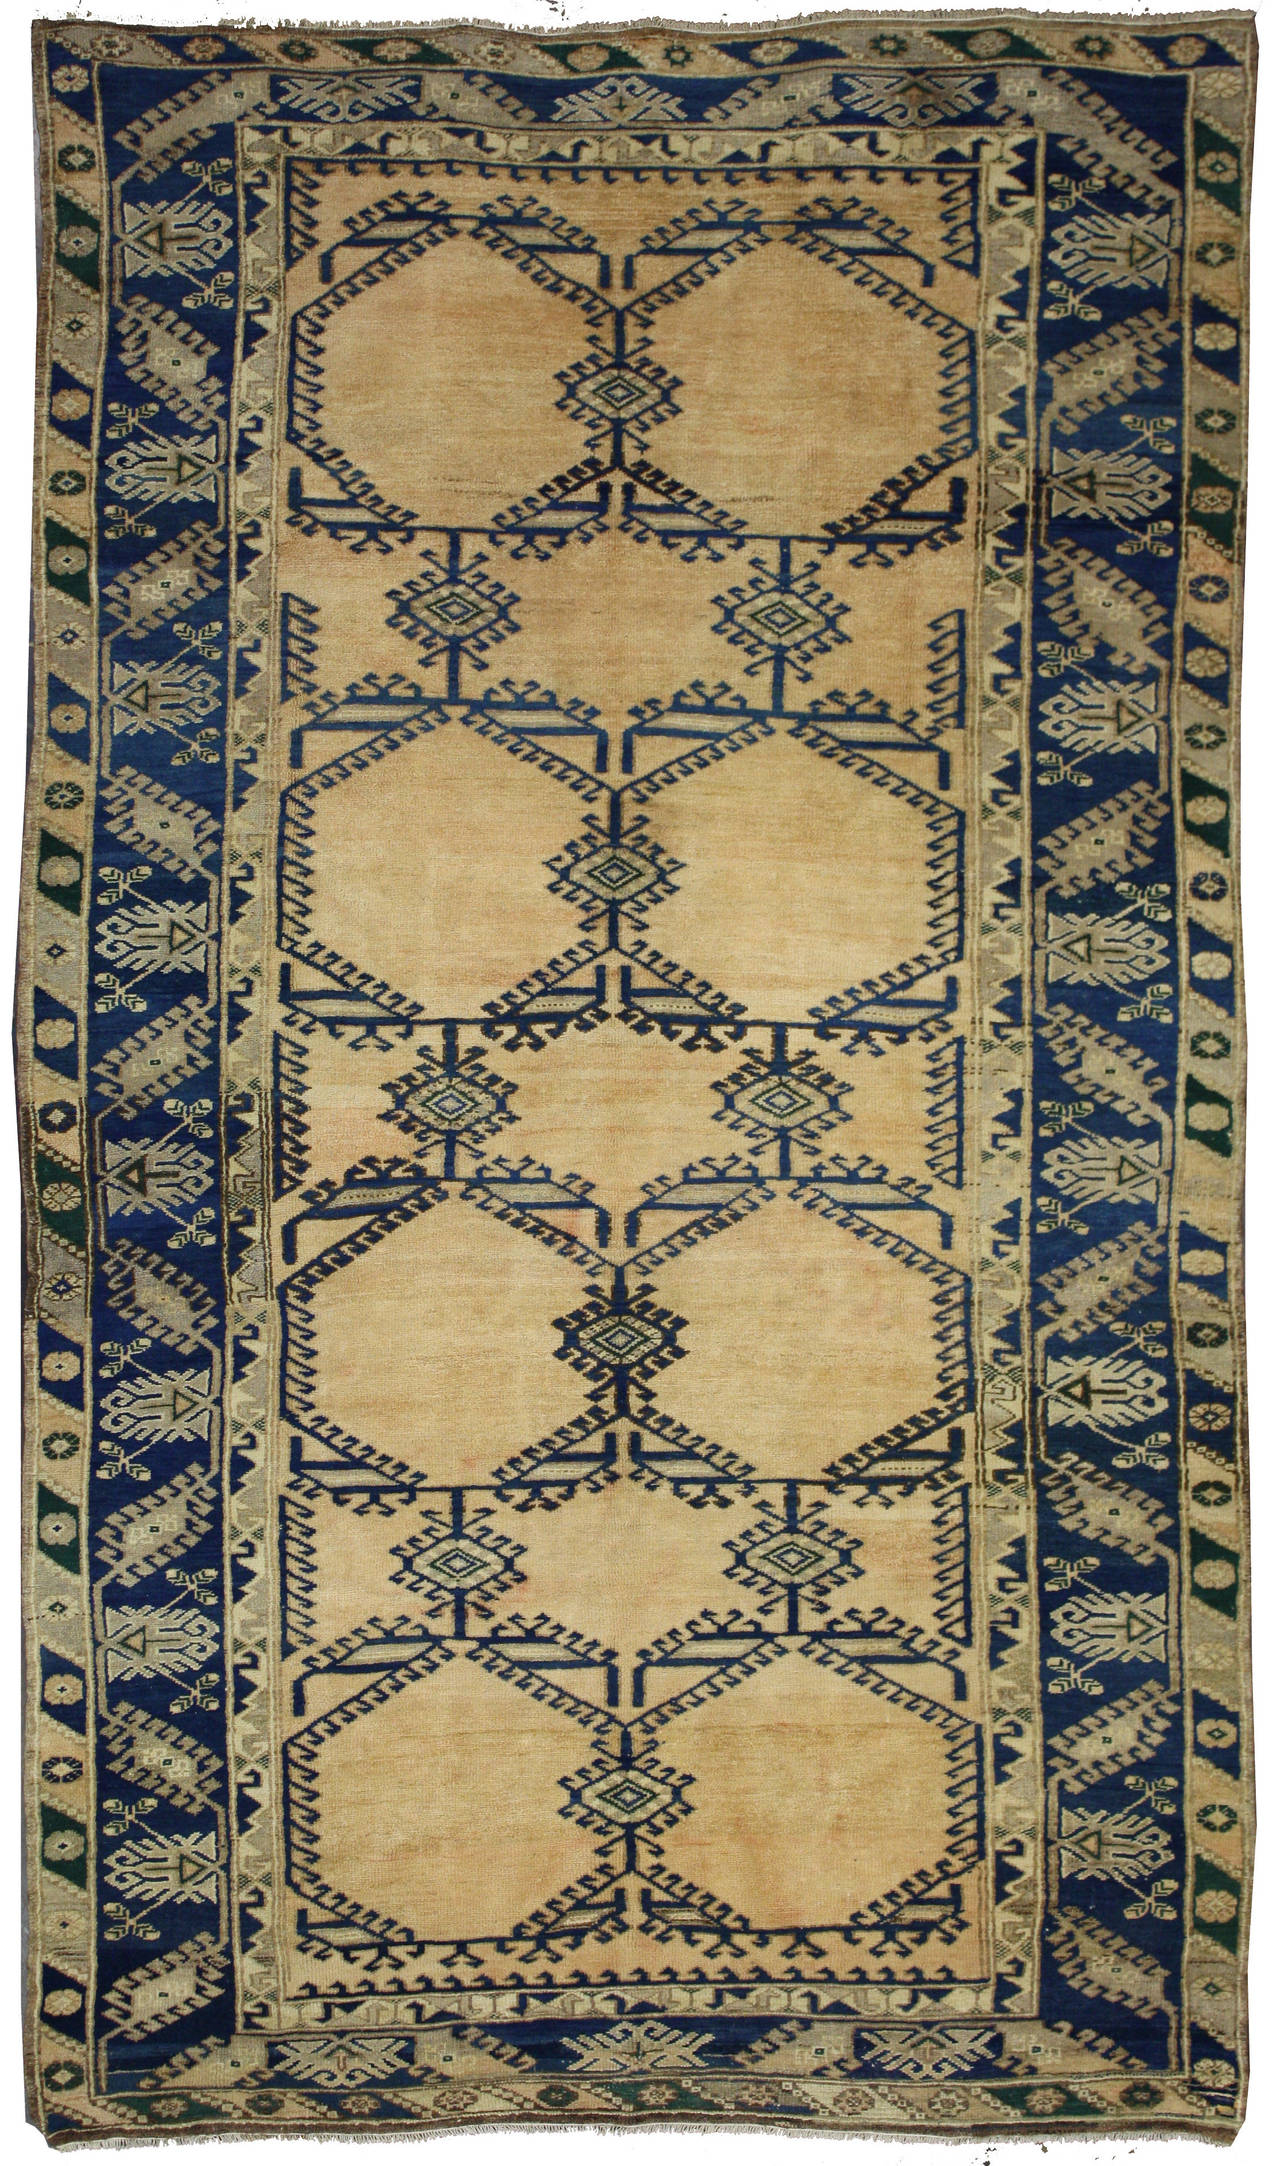 50099-50100 Pair of Vintage Turkish Oushak Gallery Rugs, Pair of Wide Hallway Runners. Foyers and hallways can set the tone for how we and our guests feel about coming into our homes. This pair of vintage Oushak runners are extra wide and have an